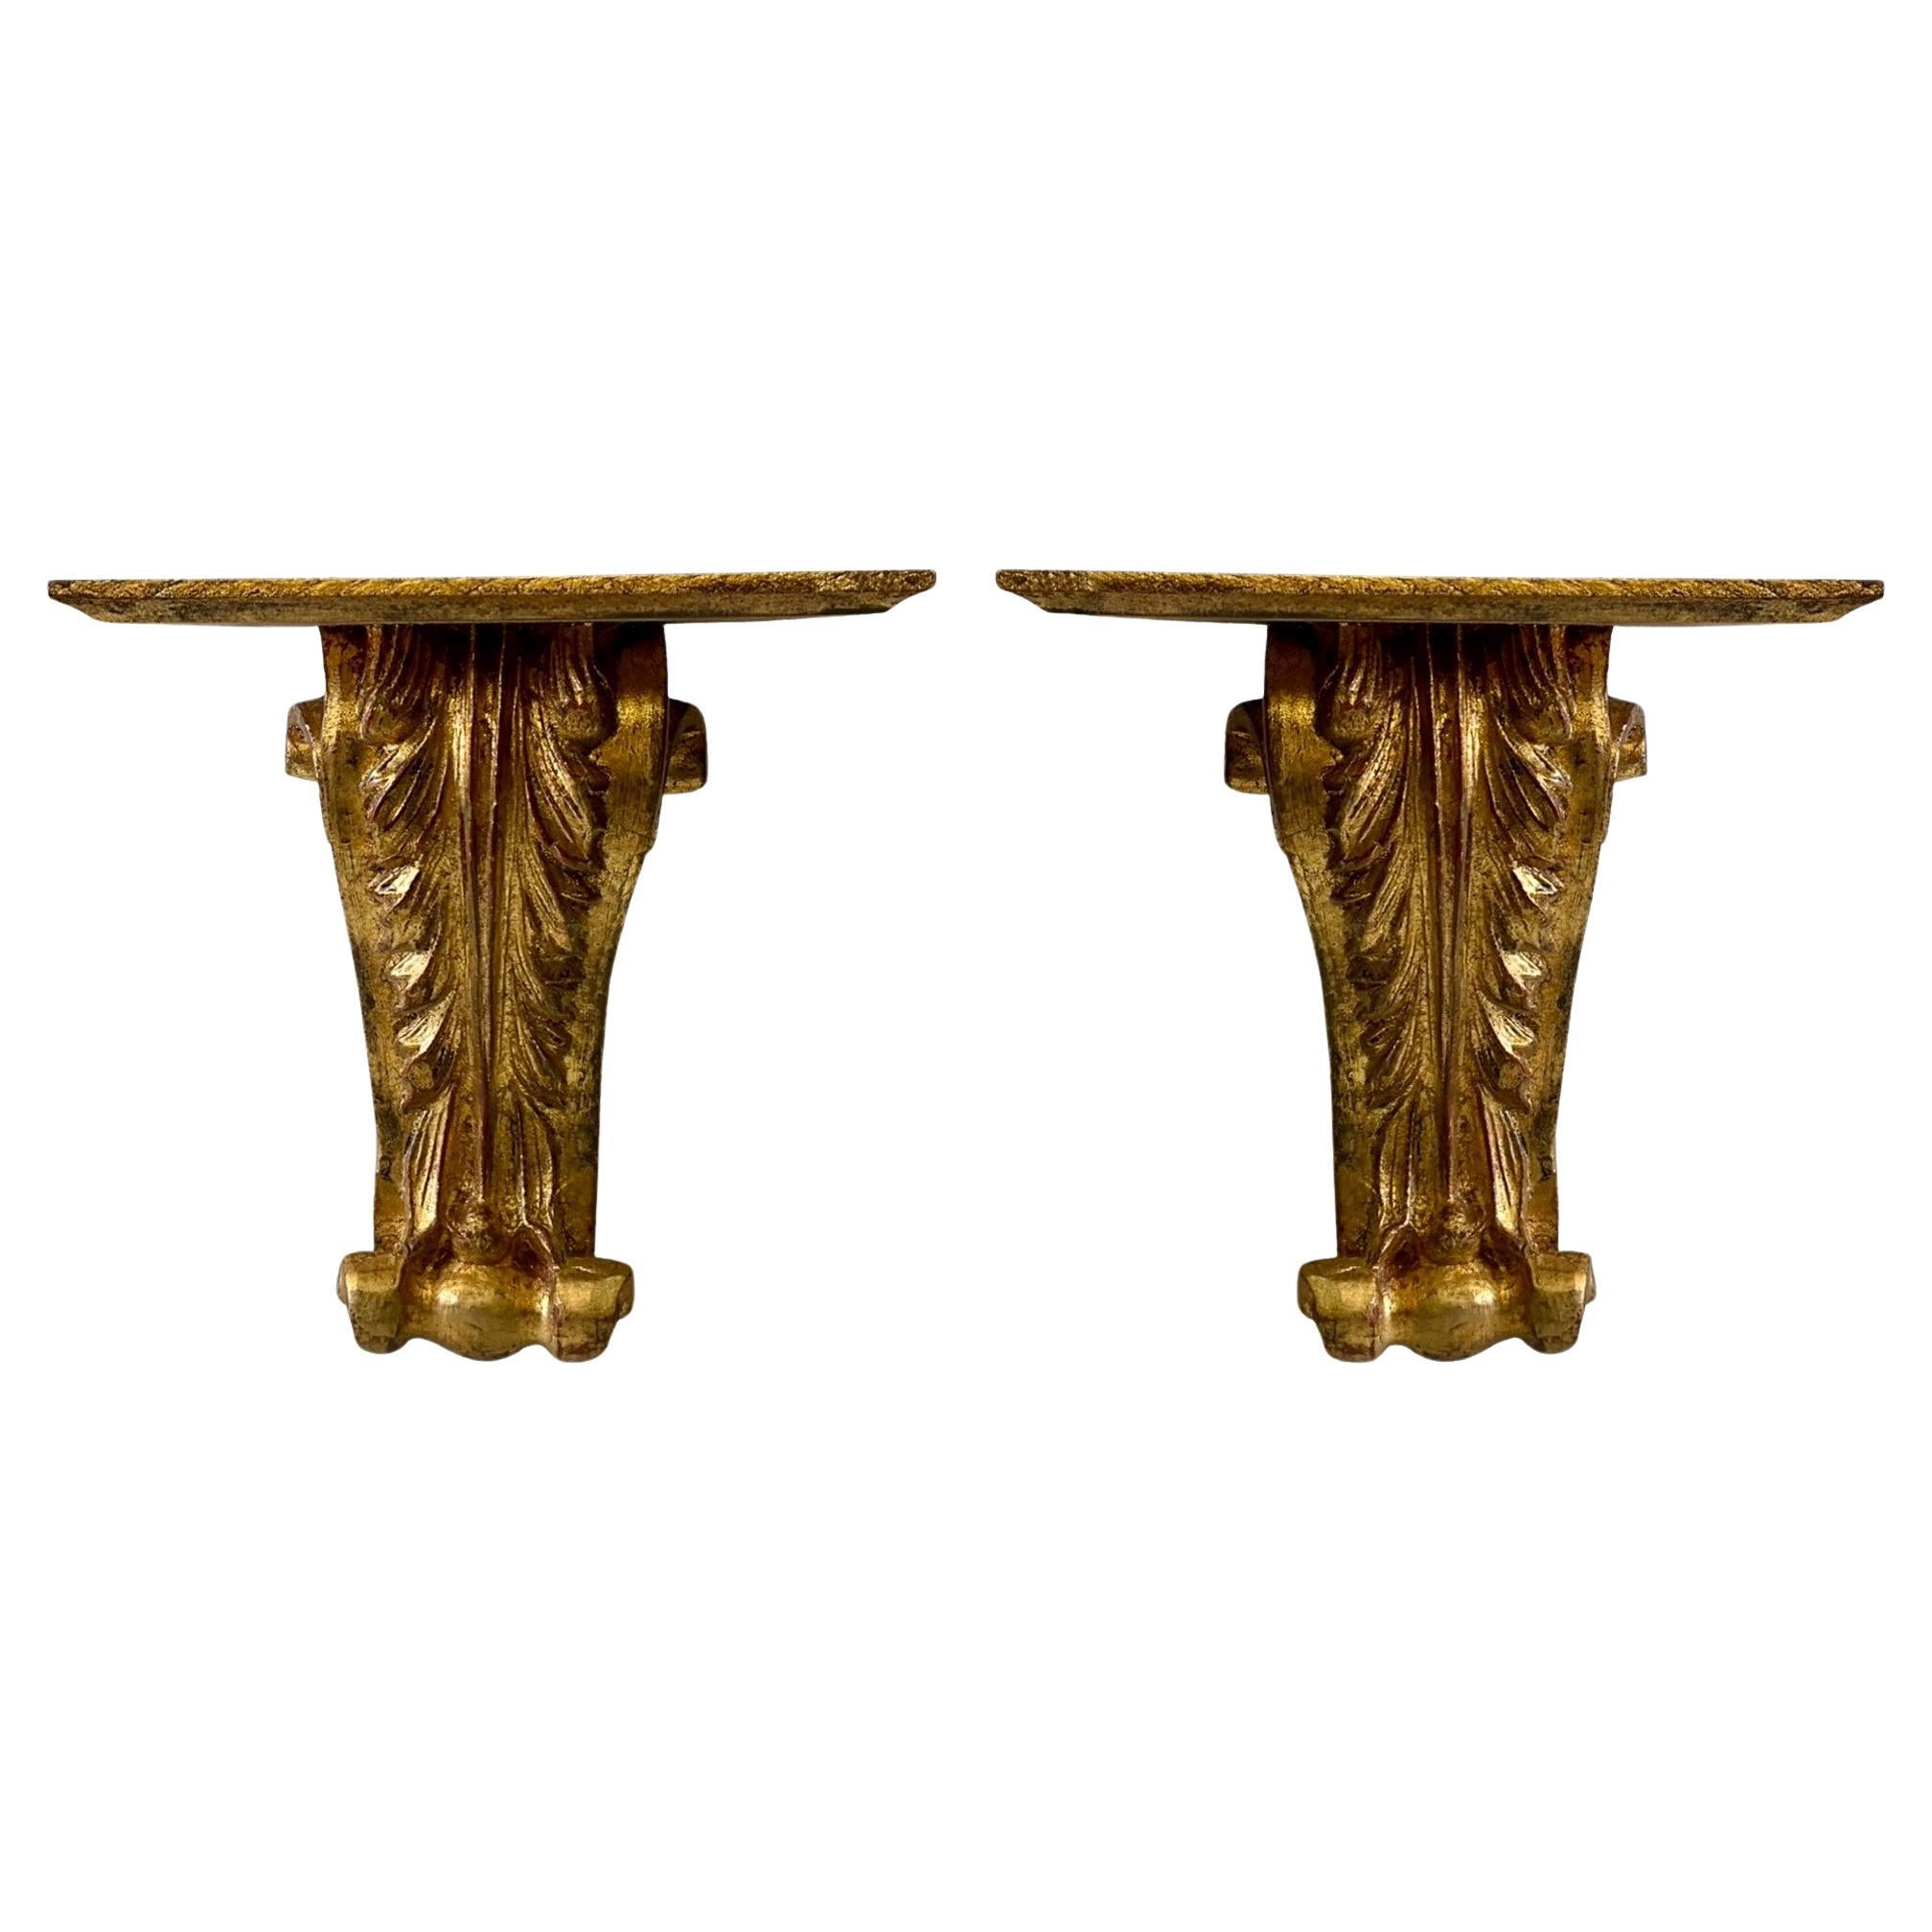 These wall brackets have timeless appeal! They are Italian with neo-classical styling and are in very good condition. They date to the 1960s and are stamped. 